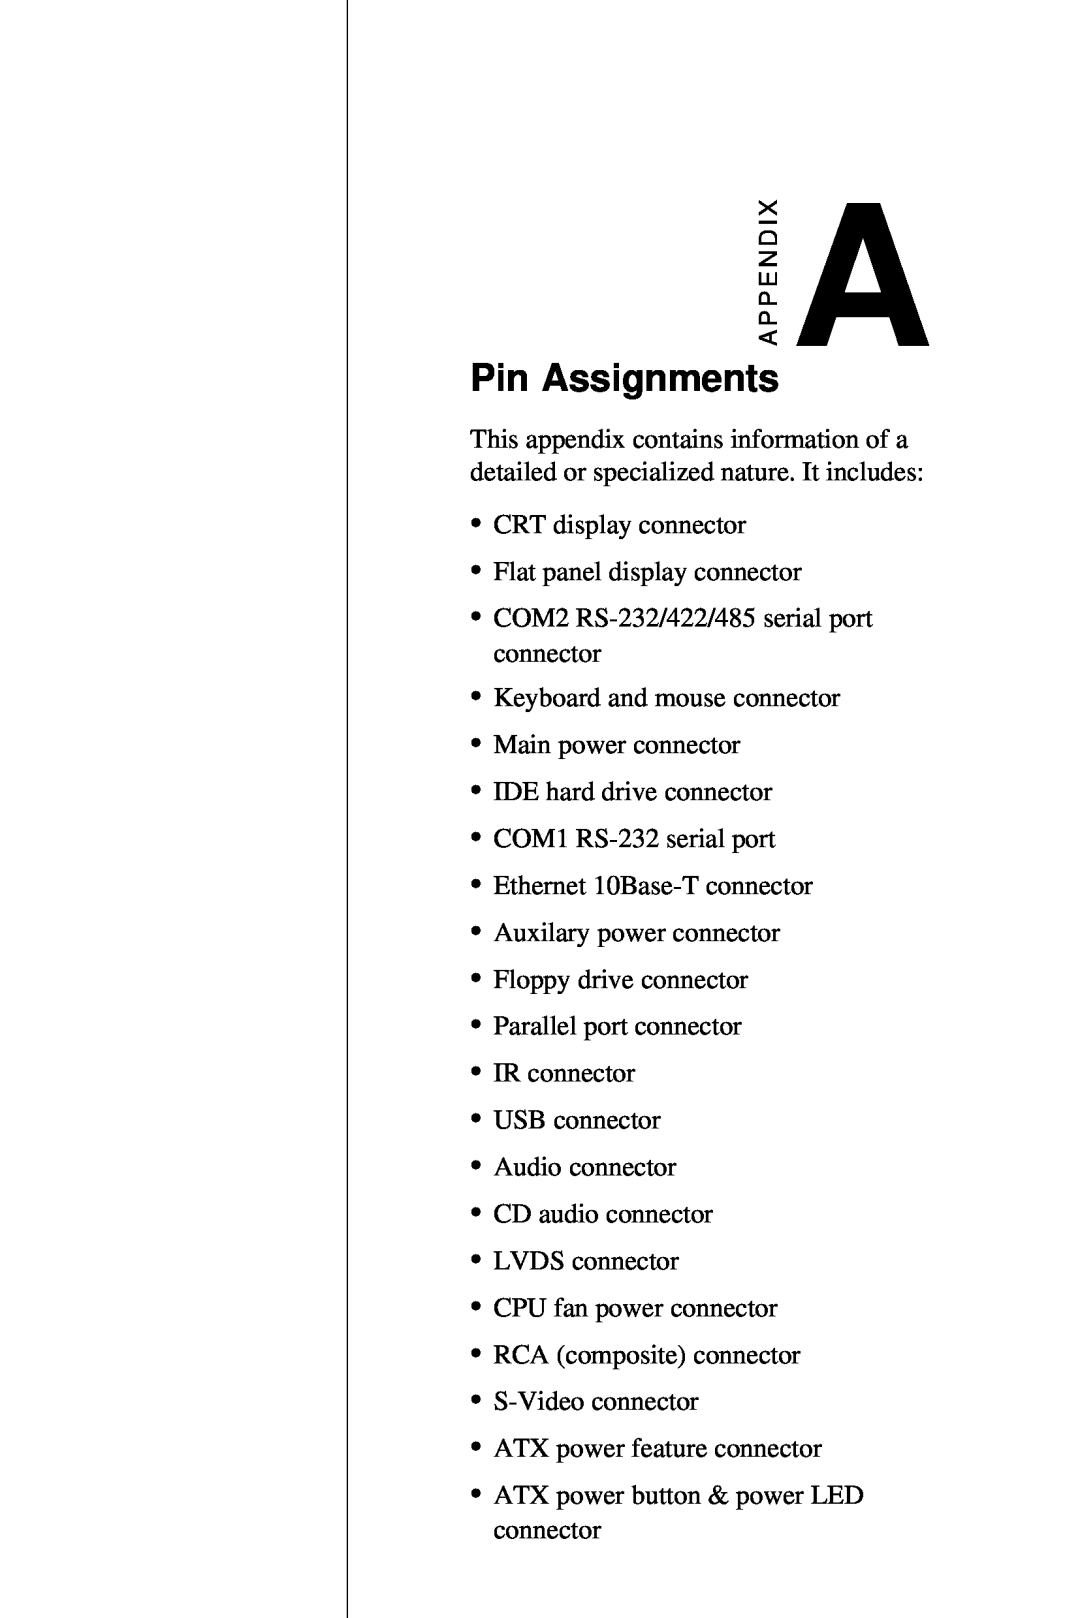 AMD PCM-5820 manual Pin Assignments 